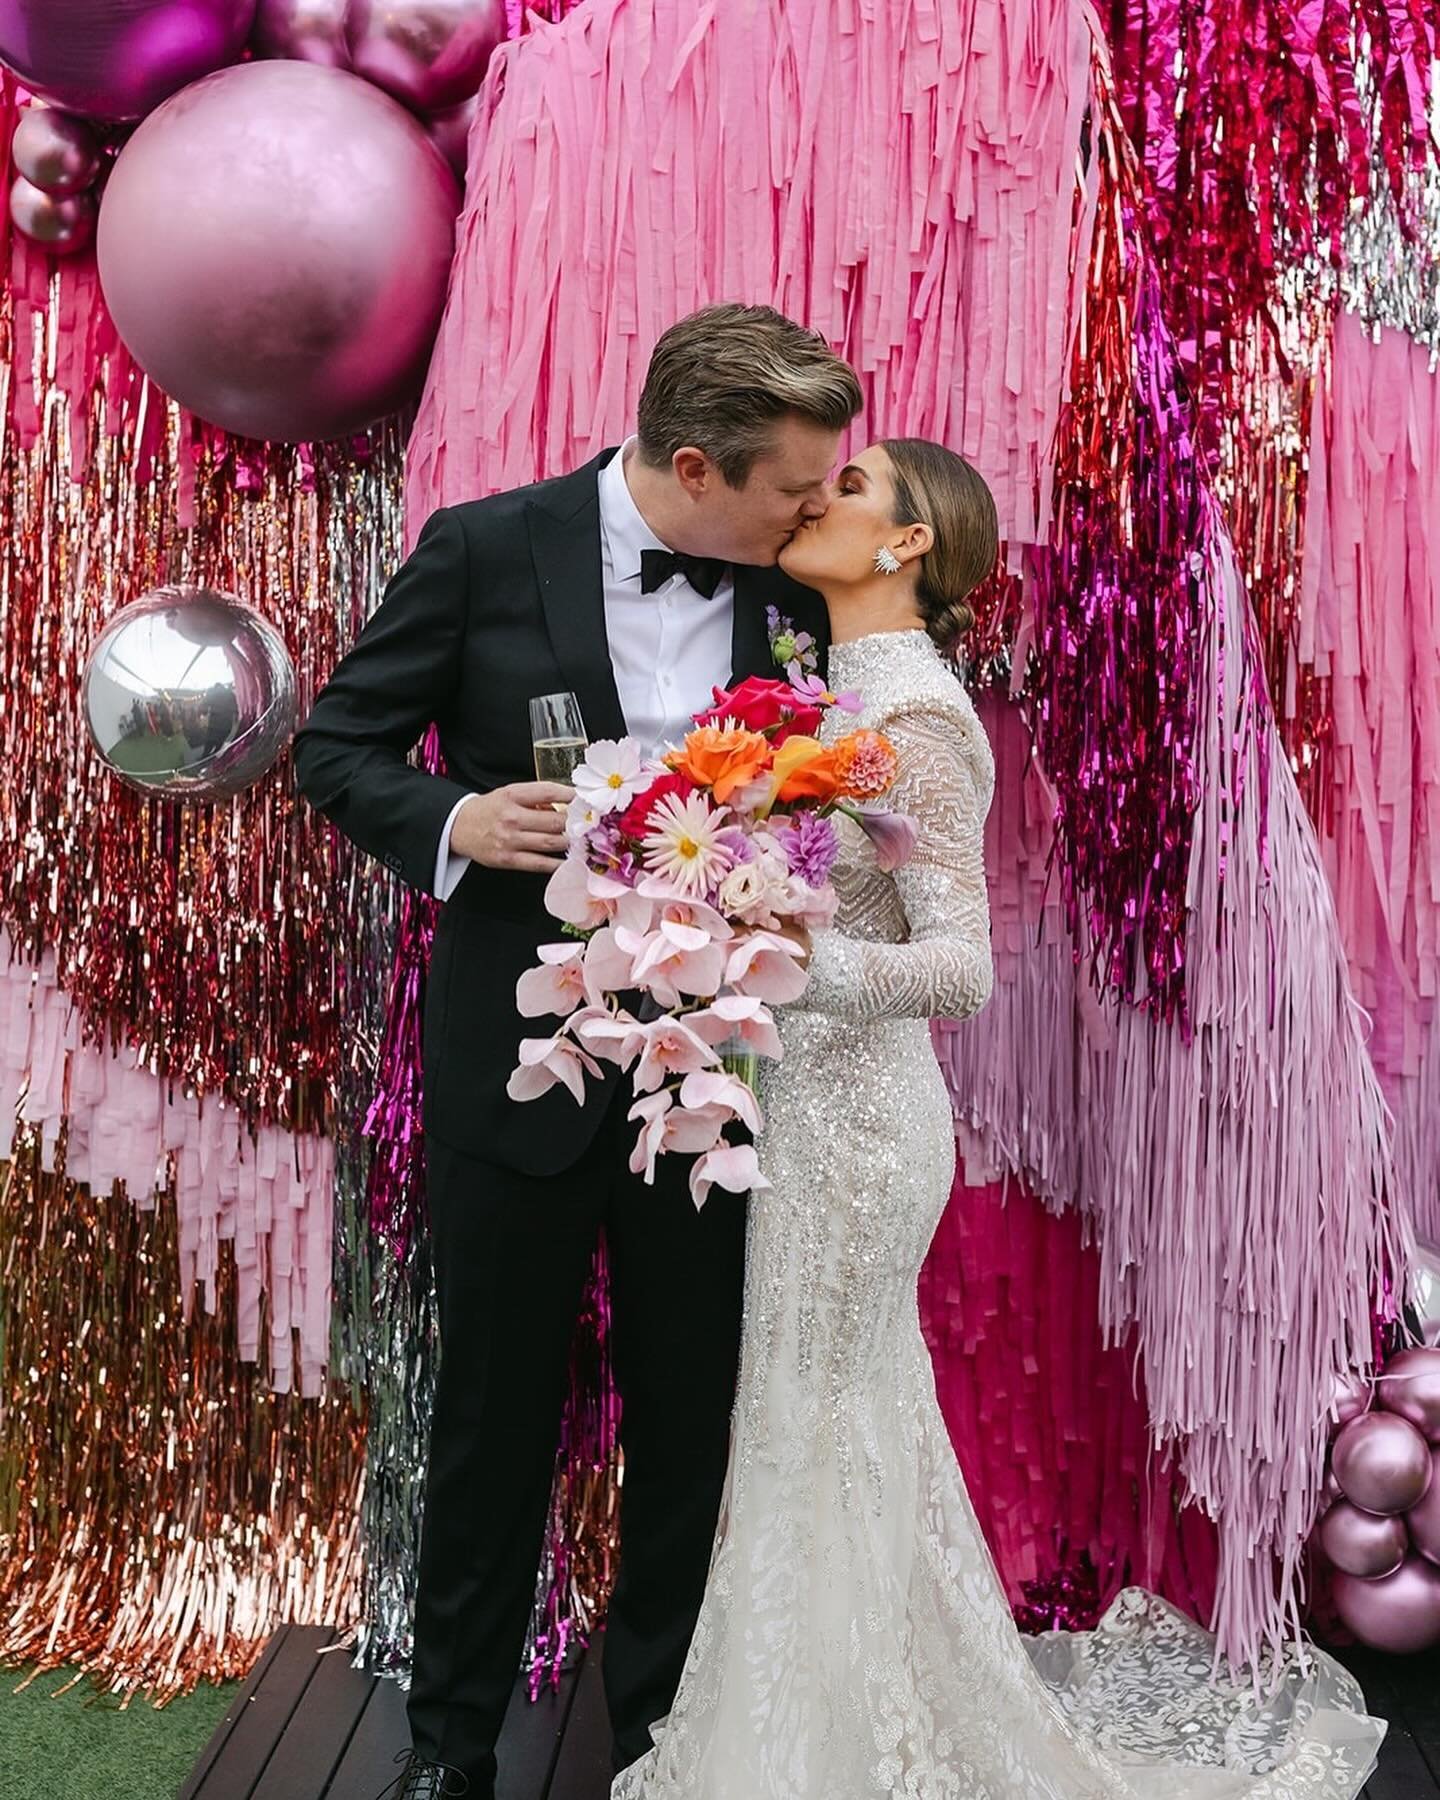 BERNIE + TIM 💖 #YeahTheMounts

Styling/Planning | @supperclubco 
Aerial Install &amp; Tassel Backdrop | @fancyschmancyballoonco
Photography | @beckrocchiphotography
Florals &amp; Giant Flowers | @petrifleur_ 
Signage &amp; Stationery | @maddisonjayn